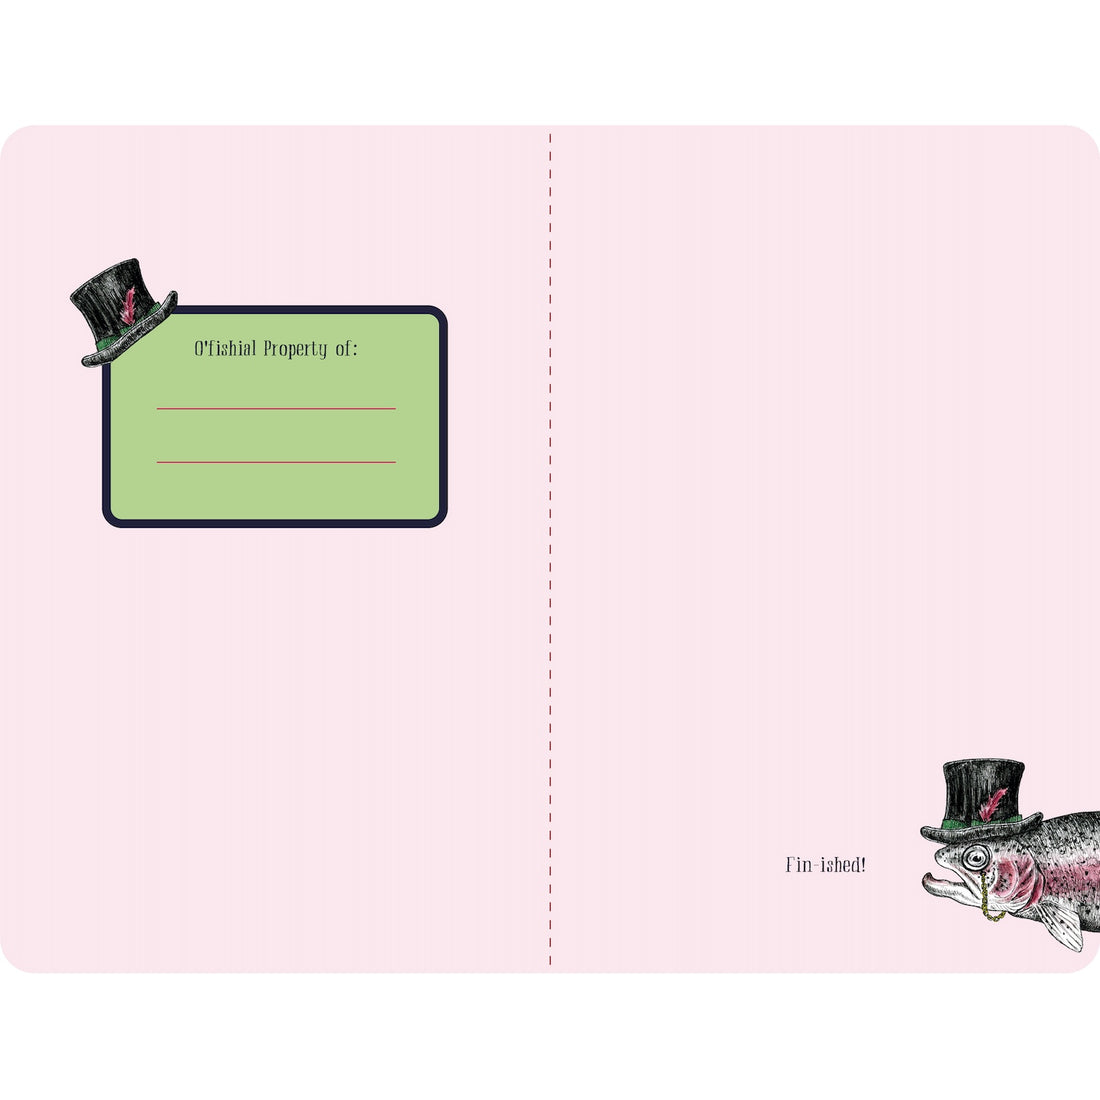 The inner front and back covers of the Sofishticated Ideas Notebook is light pink with a green tophat-adorned rectangle in the front labeled &quot;O&